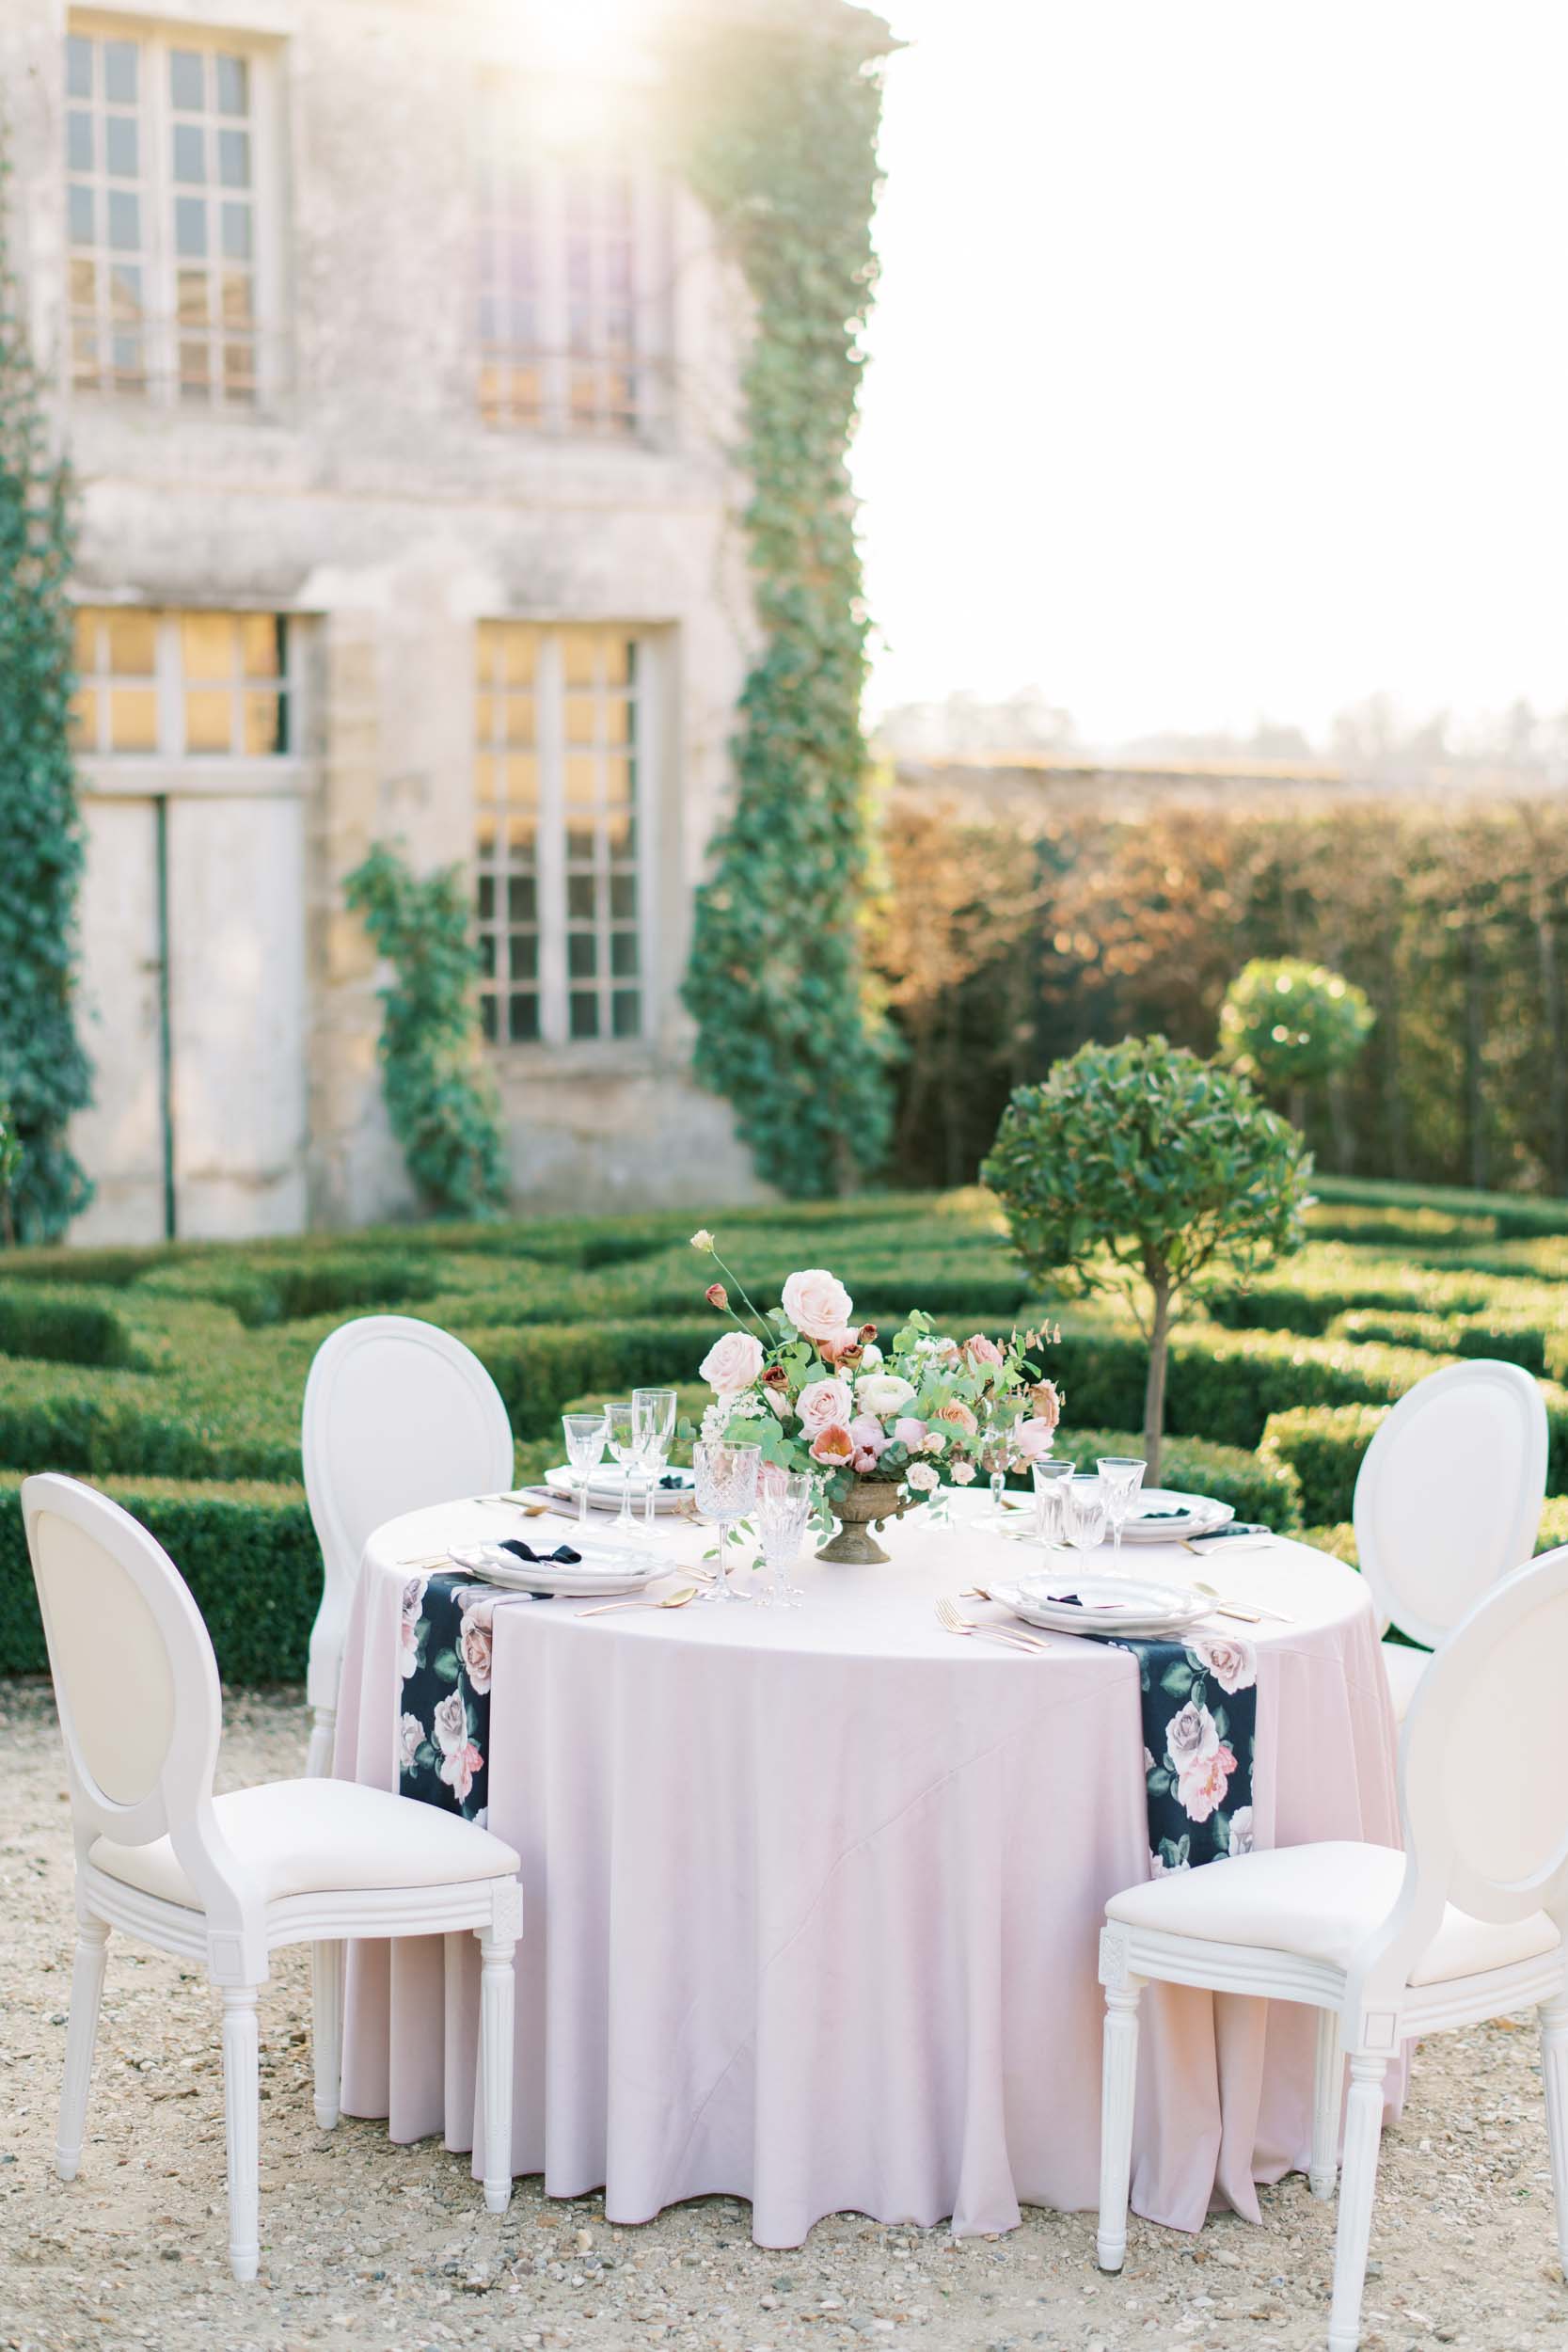 Paris chateau wedding outdoor seating